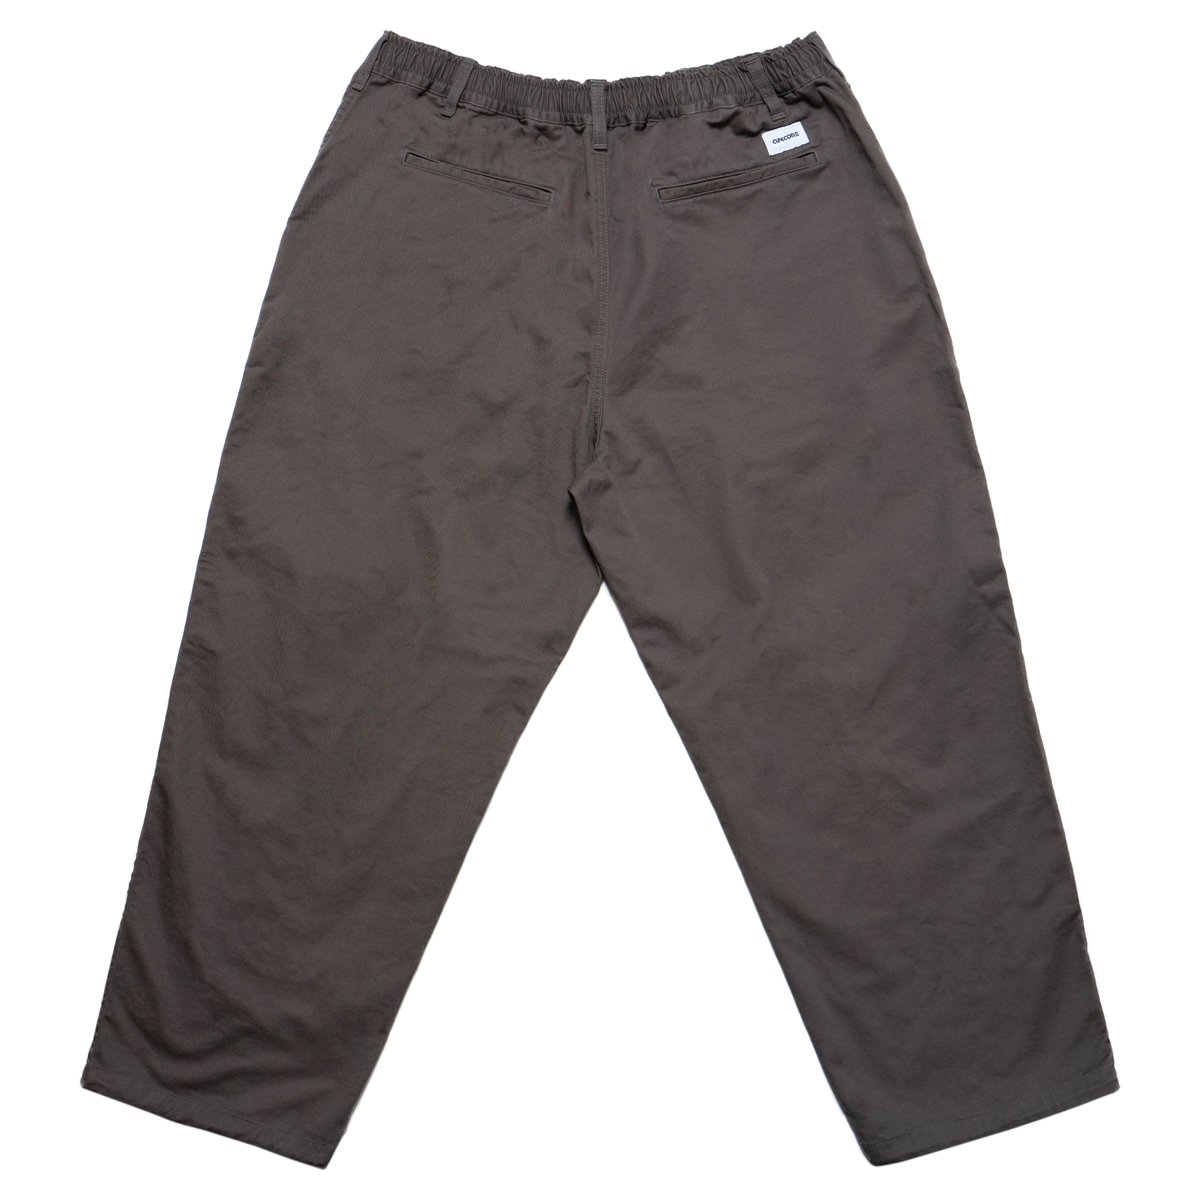 Rest Day Woven Cargo Pants